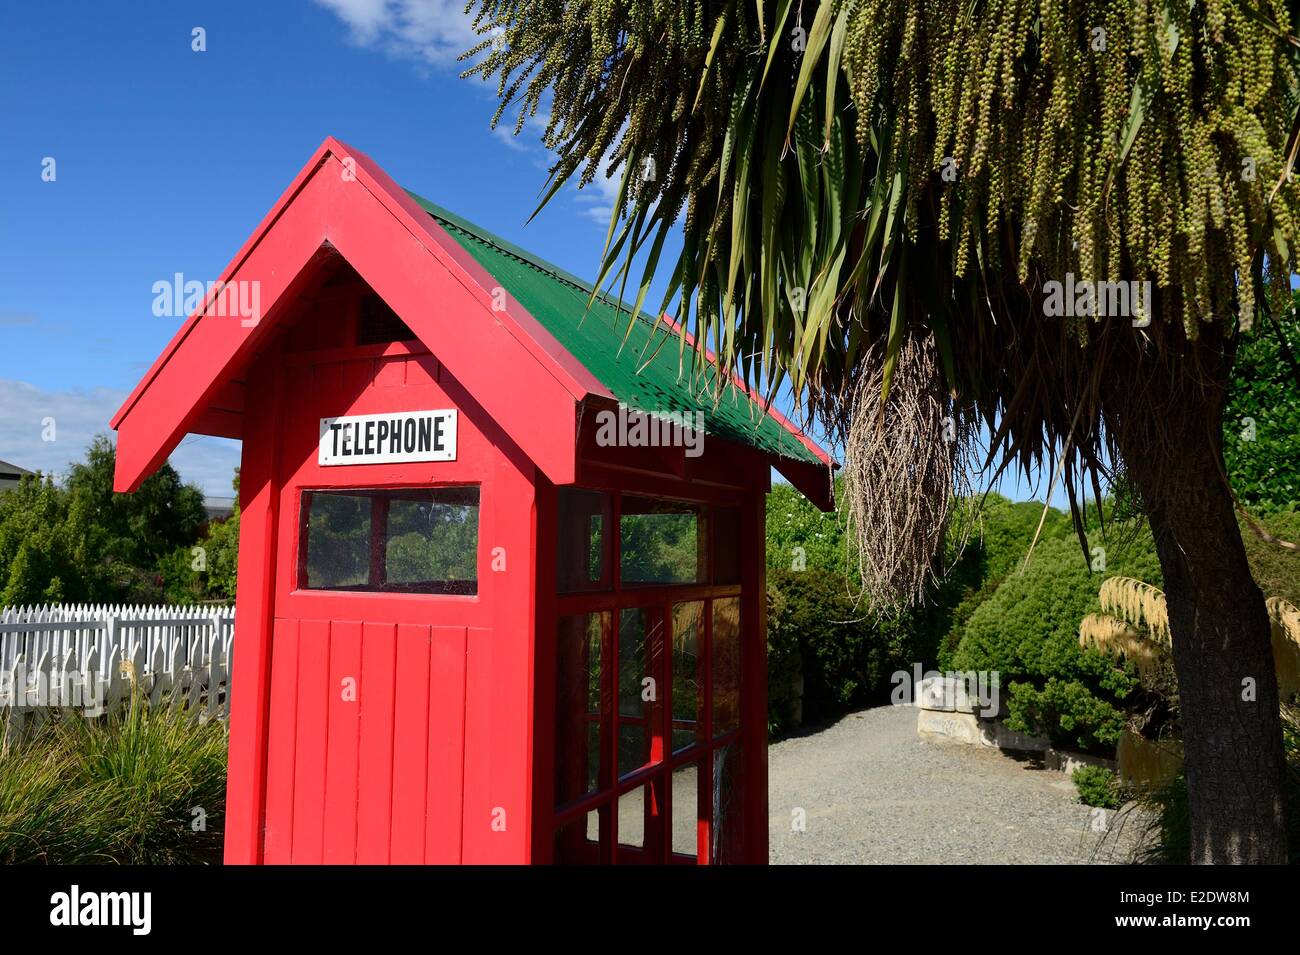 New Zealand, South island, Otago region, Oamaru is an urban center on the seafront with well-preserved old victorian buildings from the 1880s, phone box Stock Photo